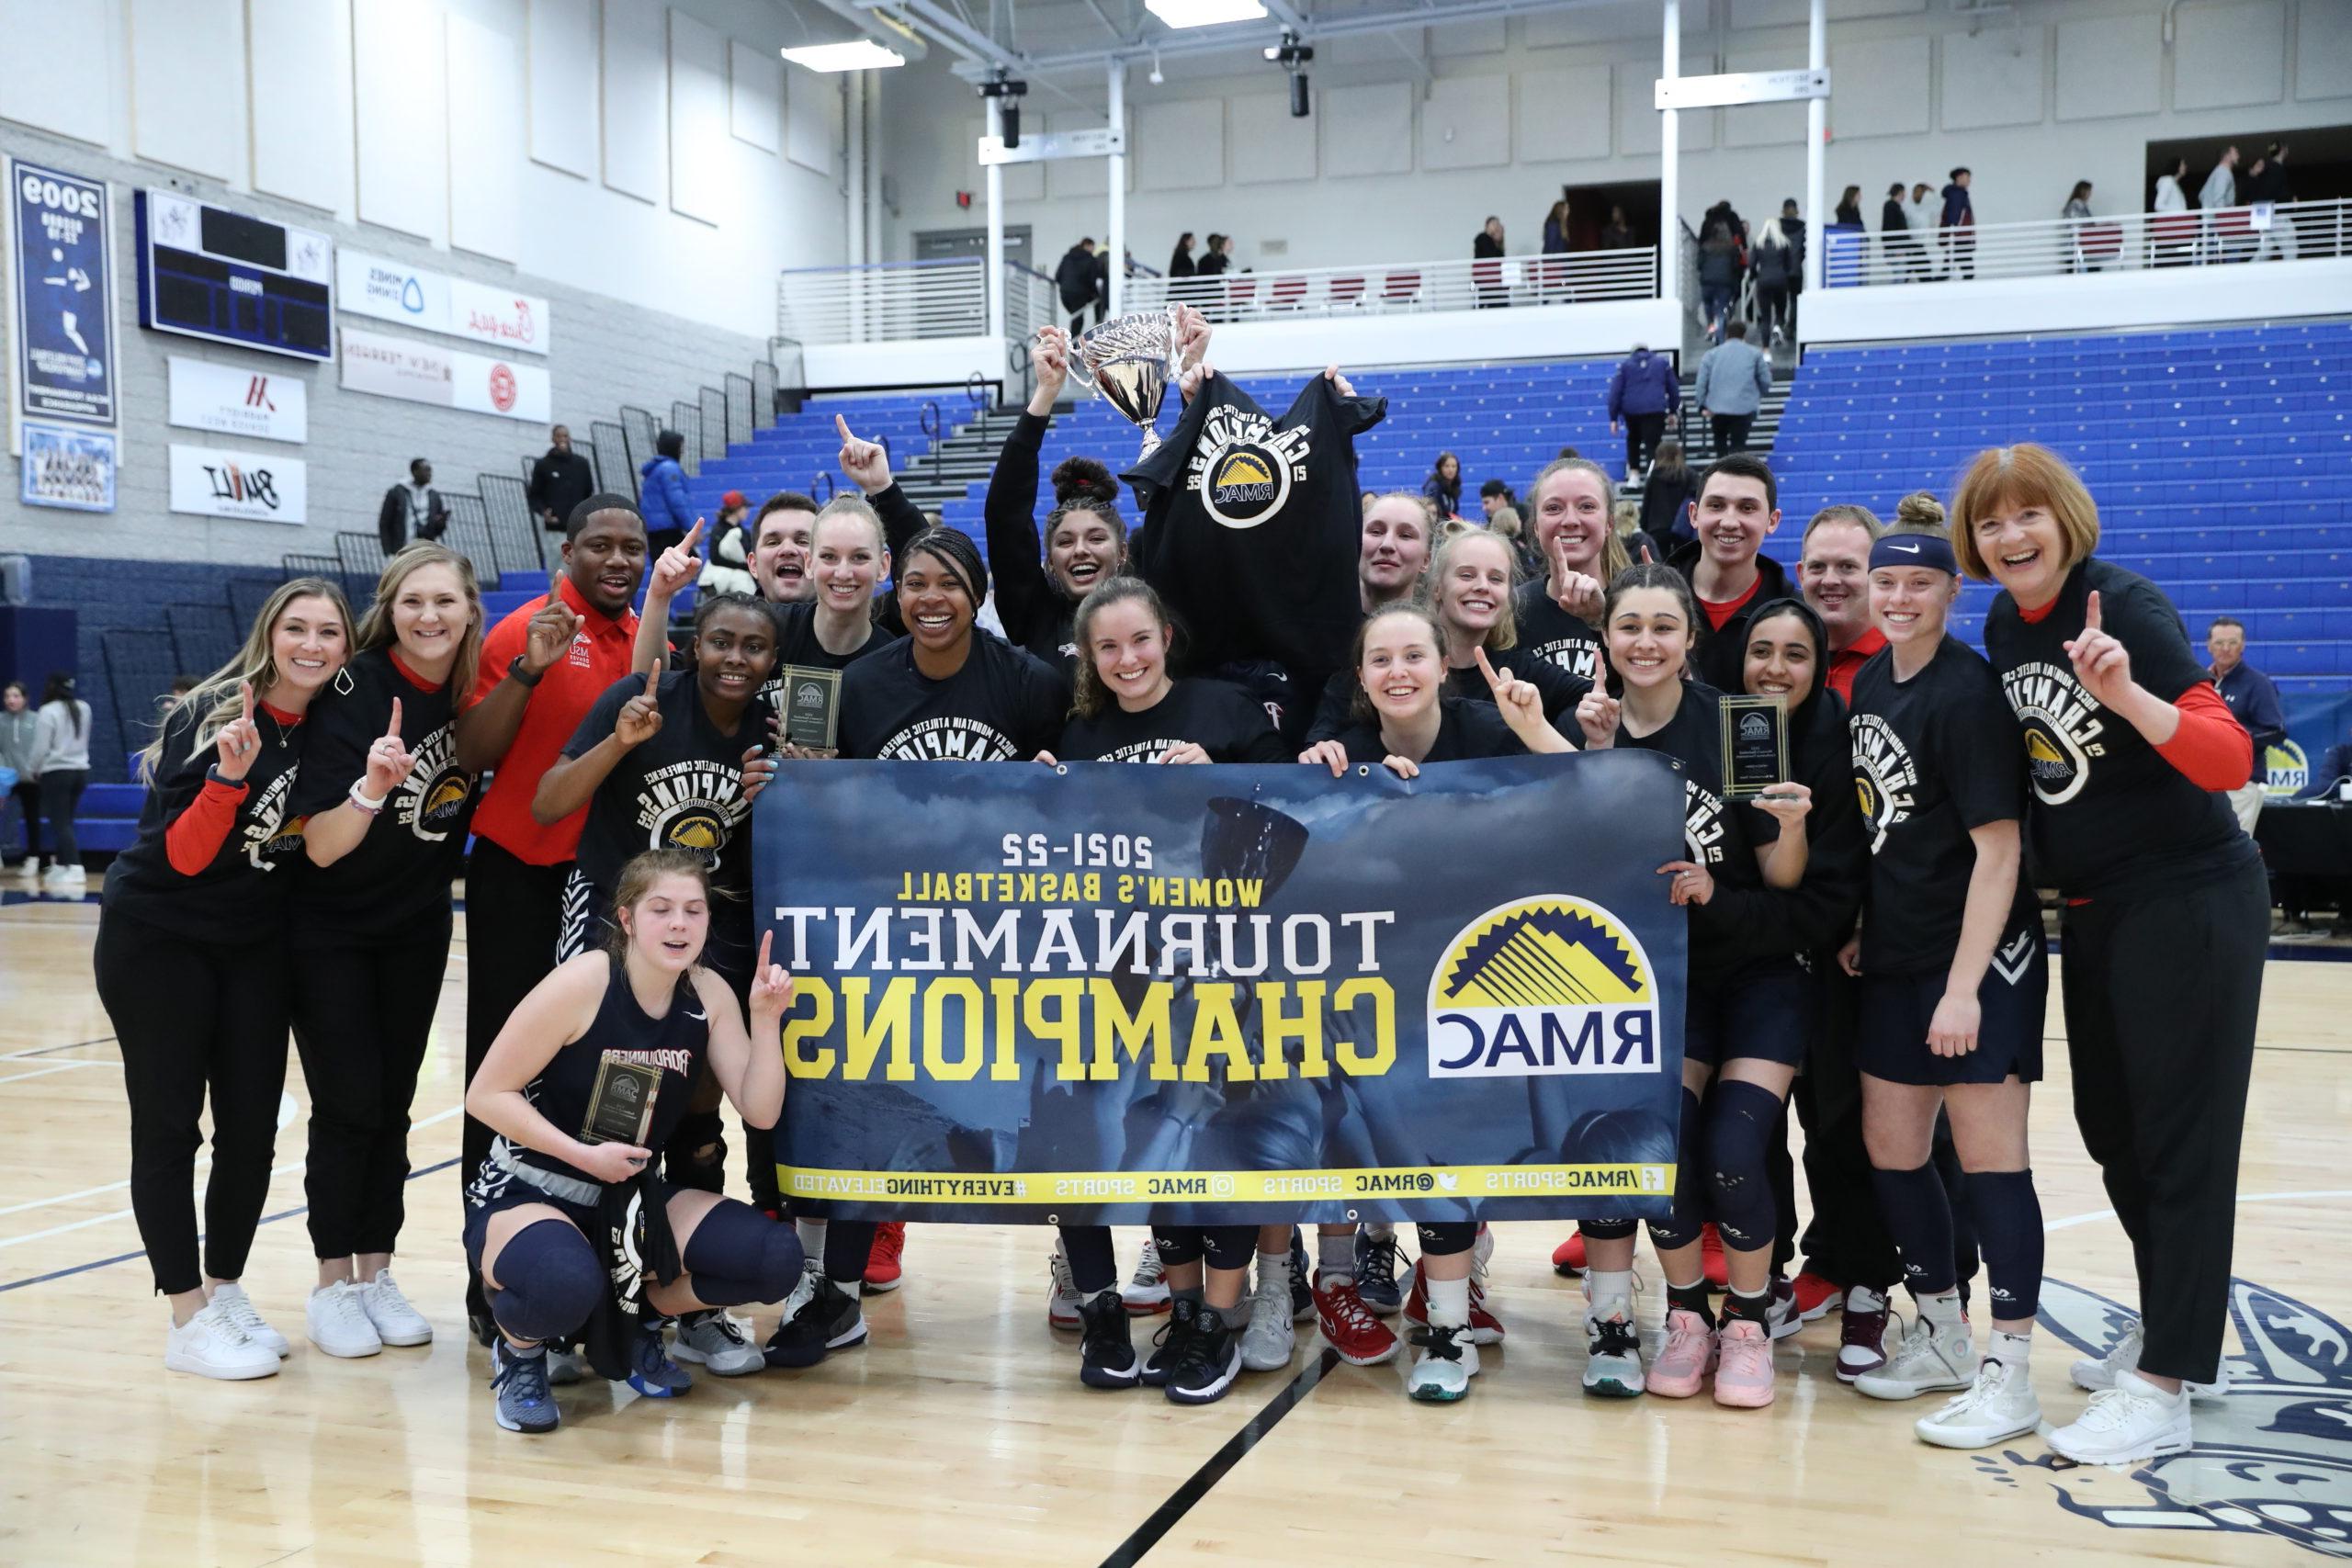 Roadrunners women's basketball team with the RMAC Championship banner after the title game in 2022.